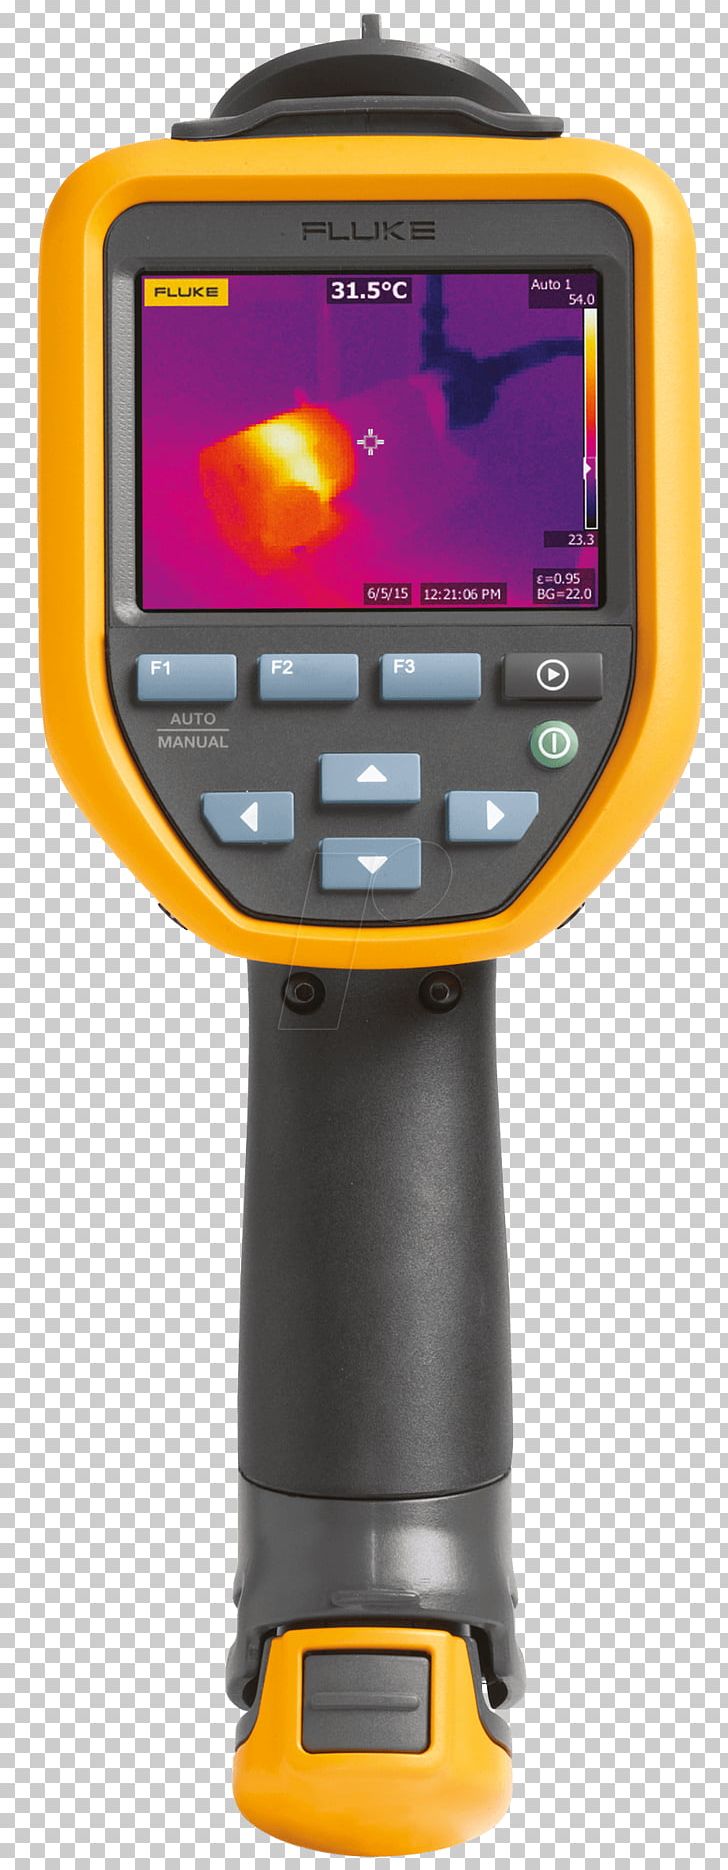 Thermographic Camera Fluke Corporation Thermography Thermal Imaging Camera PNG, Clipart, Angle, Camera, Electronics, Fluke Corporation, Gauge Free PNG Download